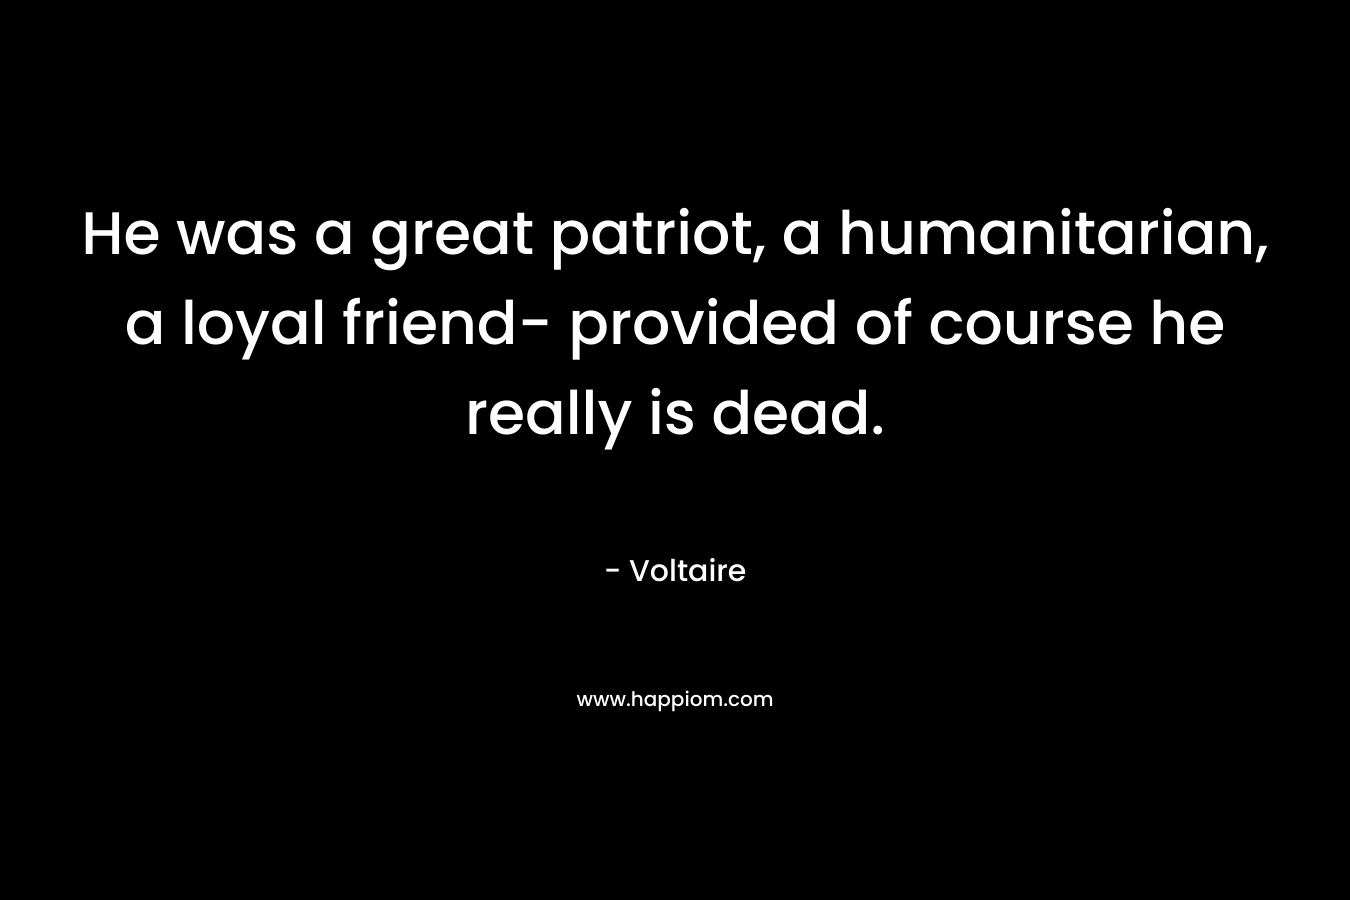 He was a great patriot, a humanitarian, a loyal friend- provided of course he really is dead. – Voltaire